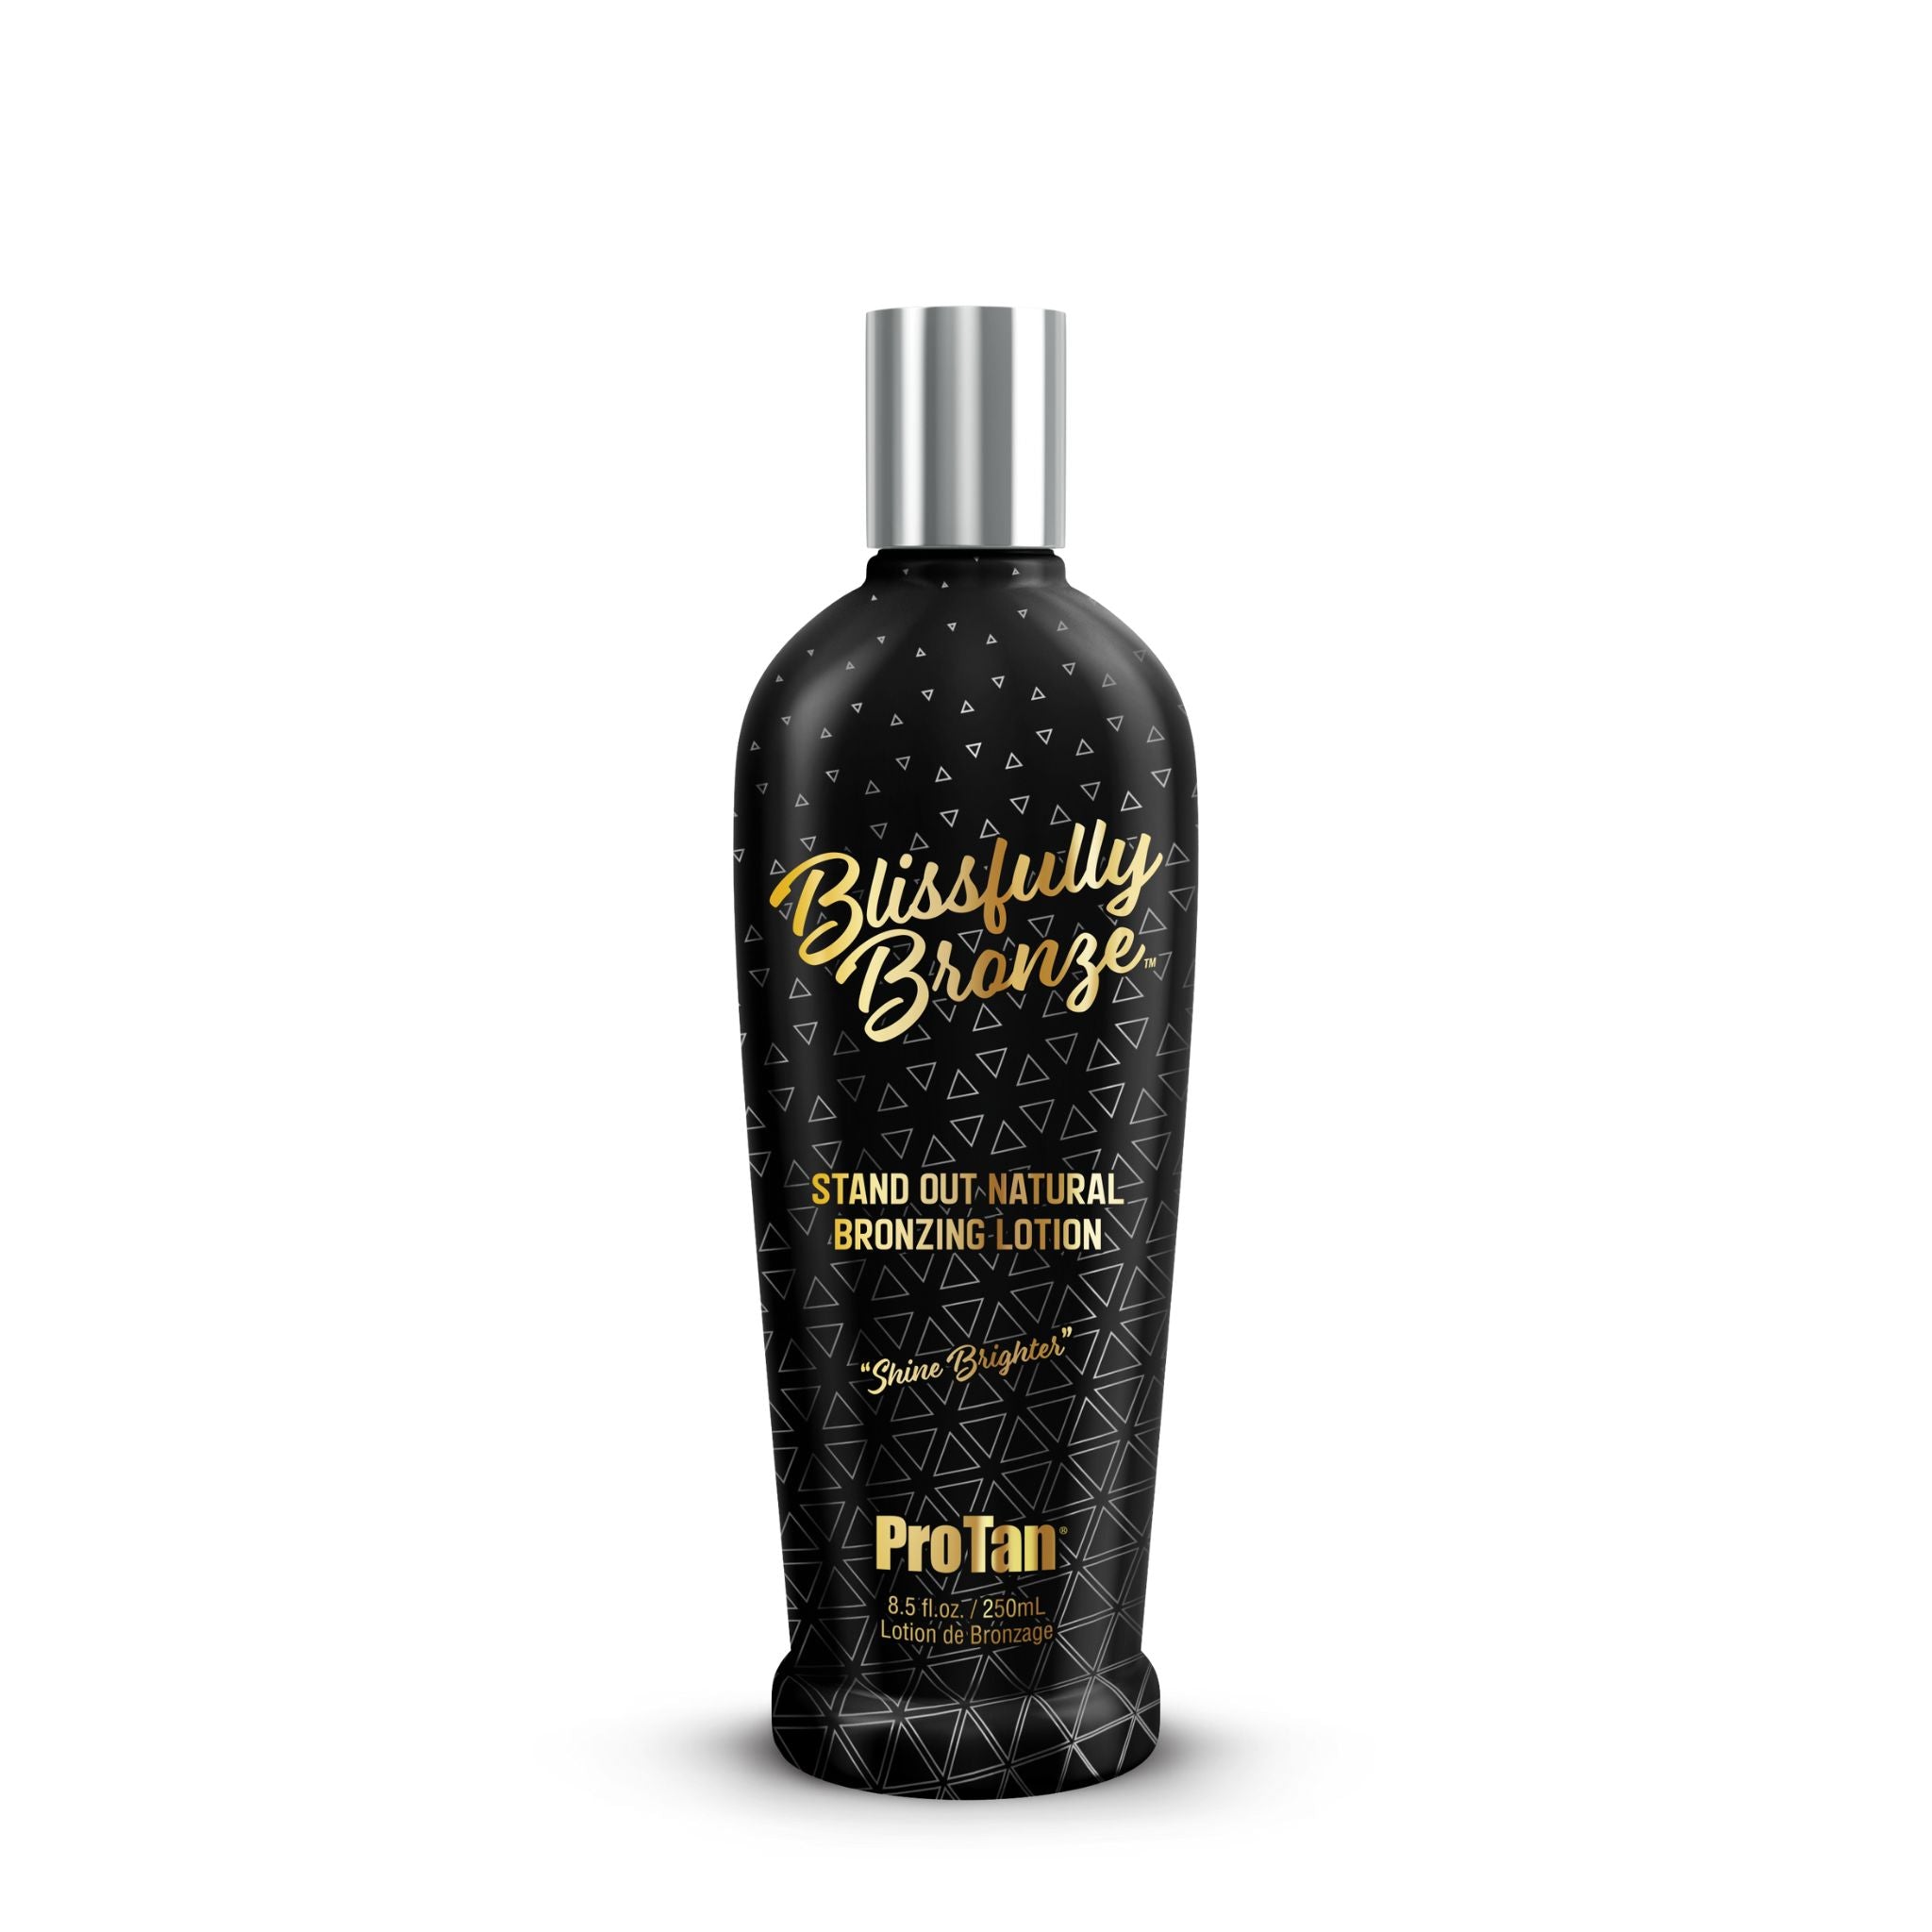 ProTan Blissfully Bronze Stand Out Natural Bronzing Tanning Lotion Bronzing Lotion